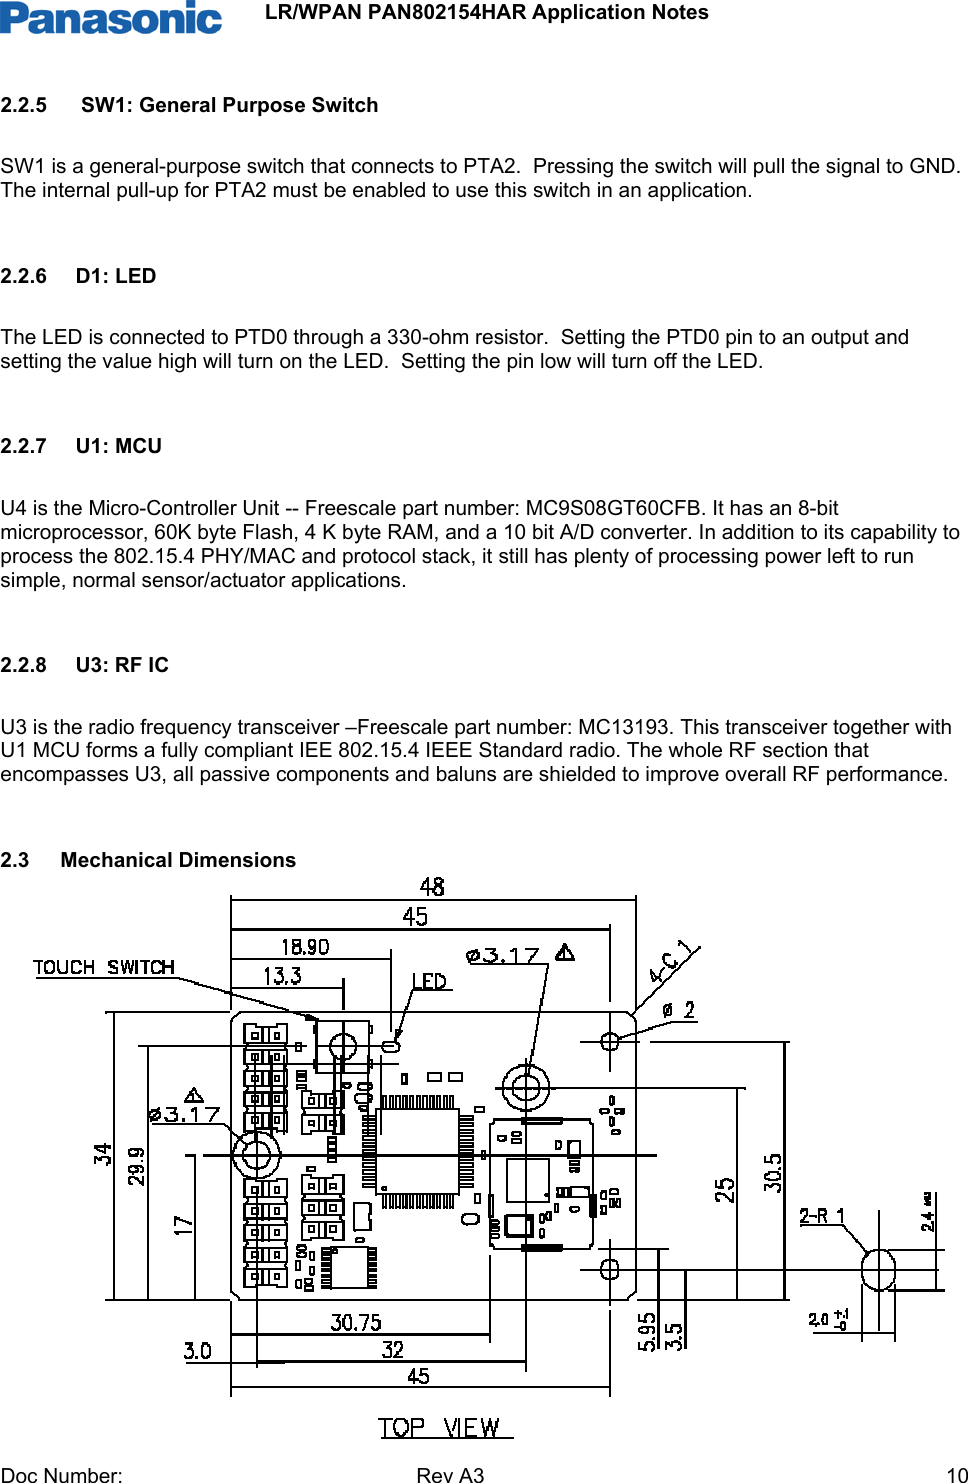                 LR/WPAN PAN802154HAR Application Notes Doc Number:   Rev A3    102.2.5   SW1: General Purpose Switch SW1 is a general-purpose switch that connects to PTA2.  Pressing the switch will pull the signal to GND.  The internal pull-up for PTA2 must be enabled to use this switch in an application.  2.2.6  D1: LED  The LED is connected to PTD0 through a 330-ohm resistor.  Setting the PTD0 pin to an output and setting the value high will turn on the LED.  Setting the pin low will turn off the LED.  2.2.7 U1: MCU U4 is the Micro-Controller Unit -- Freescale part number: MC9S08GT60CFB. It has an 8-bit microprocessor, 60K byte Flash, 4 K byte RAM, and a 10 bit A/D converter. In addition to its capability to process the 802.15.4 PHY/MAC and protocol stack, it still has plenty of processing power left to run simple, normal sensor/actuator applications.  2.2.8 U3: RF IC U3 is the radio frequency transceiver –Freescale part number: MC13193. This transceiver together with U1 MCU forms a fully compliant IEE 802.15.4 IEEE Standard radio. The whole RF section that encompasses U3, all passive components and baluns are shielded to improve overall RF performance.  2.3 Mechanical Dimensions               